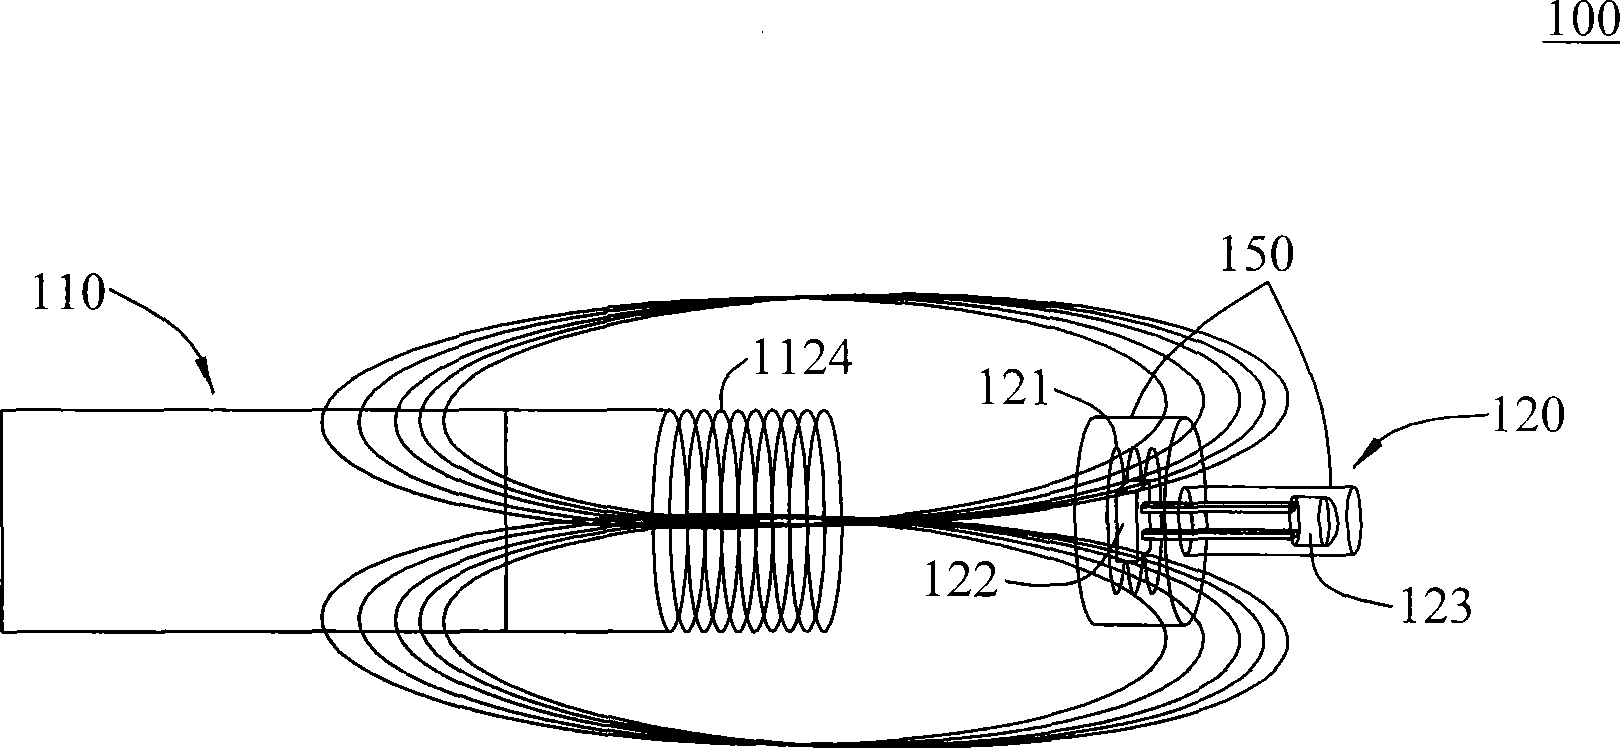 Inductor applied to light power diagnosis and therapy